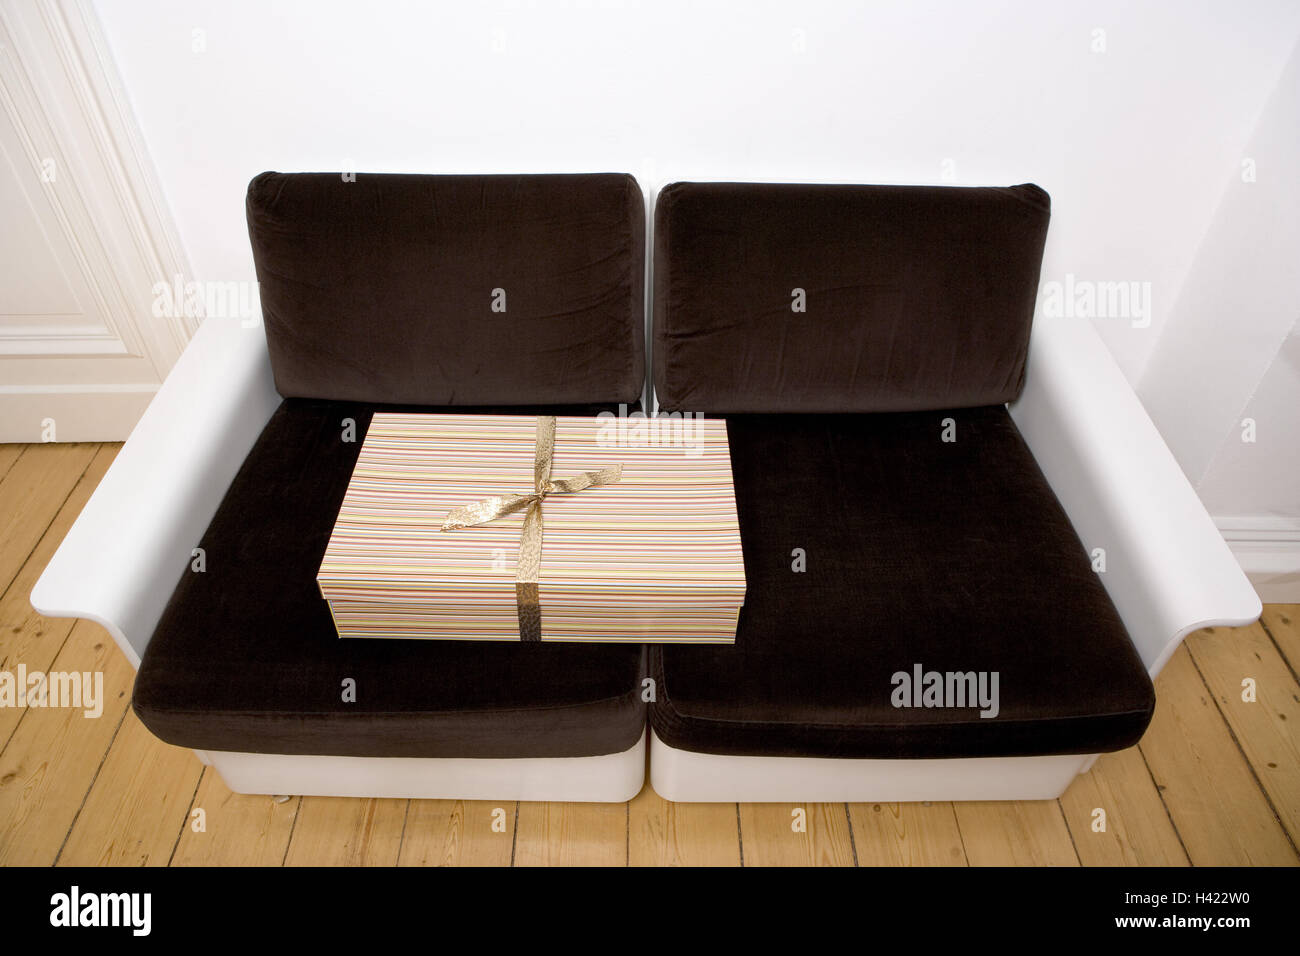 Sofa, gift,,     Furniture, upholsteries, two-seaters, cushions, brown, package, birthday gift, Christmas gift, surprise, package, gift package, gift band, quietly life, interior, Stock Photo